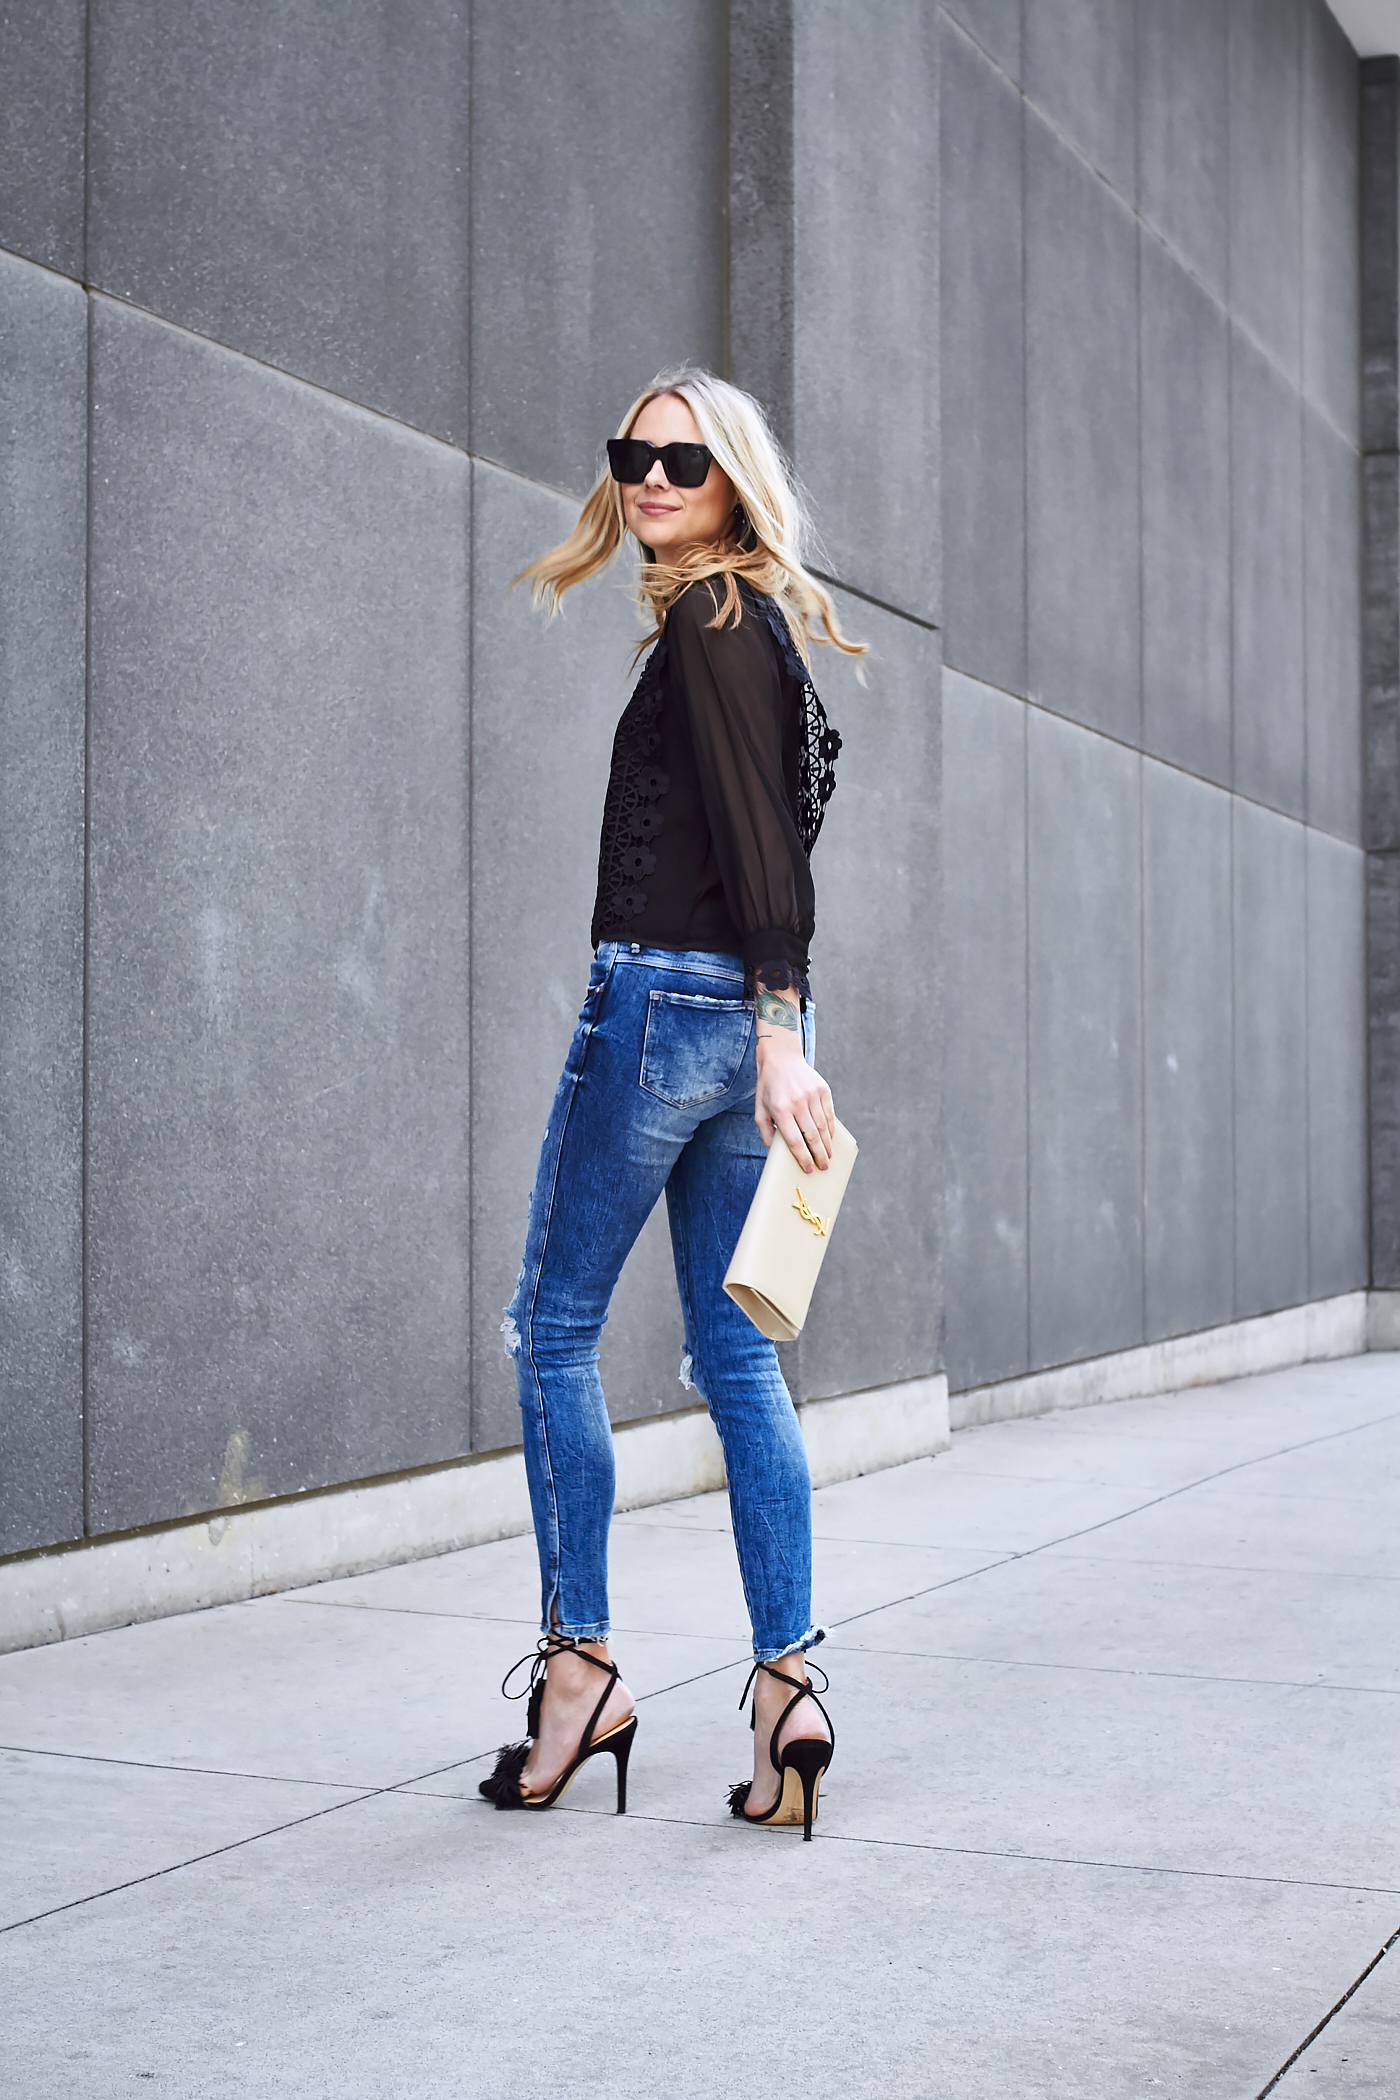 Chicwish Black Lace Top, Zara Destructed Skinny Jeans, Black Tassel Heels, Saint Laurent Monogram Clutch, Fall Outfit, Date Night Outfit